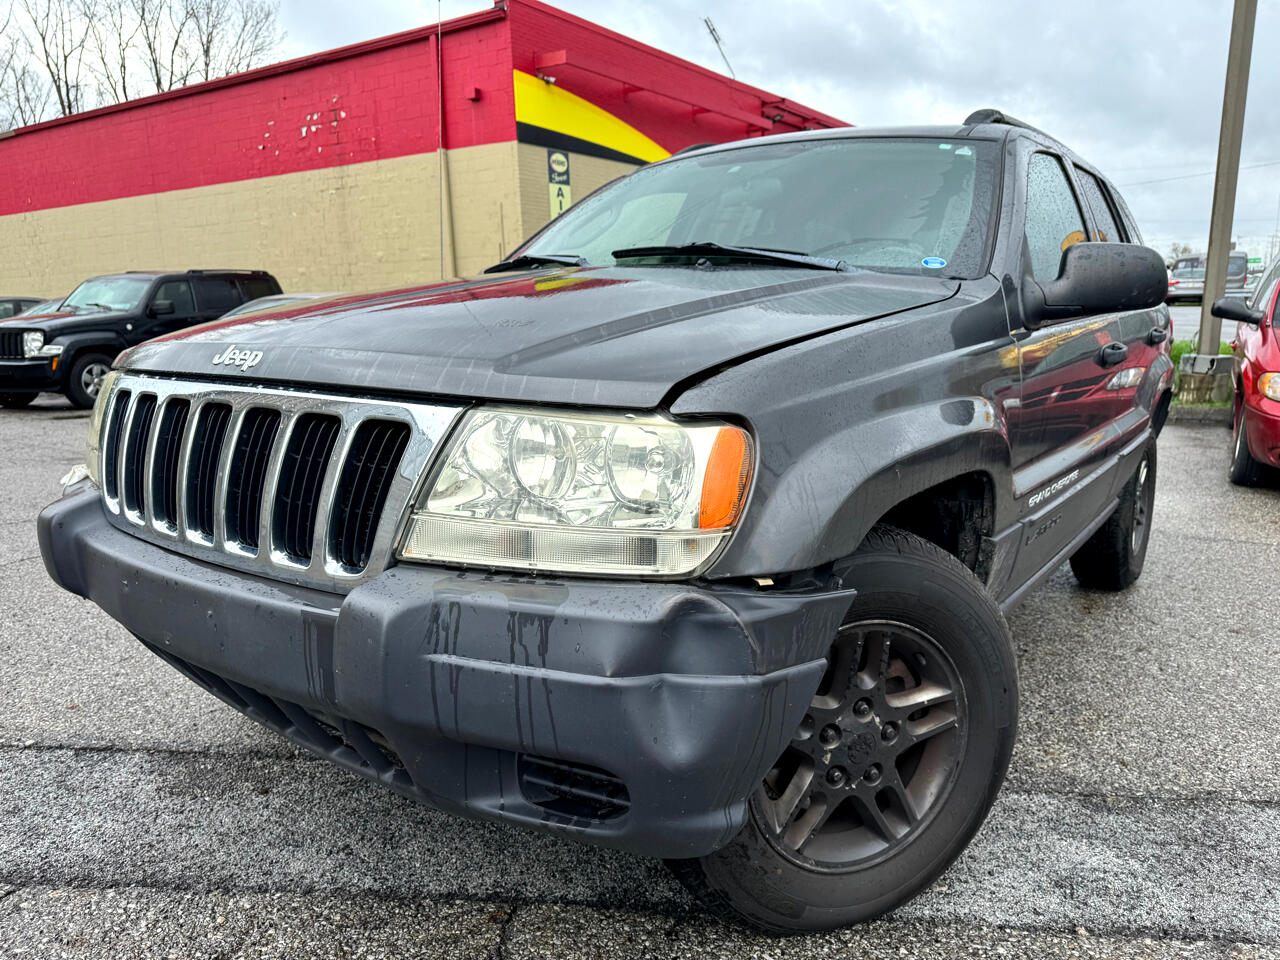 Used 2003 Jeep Grand Cherokee LAREDO with VIN 1J4GW48SX3C580333 for sale in Columbus, OH